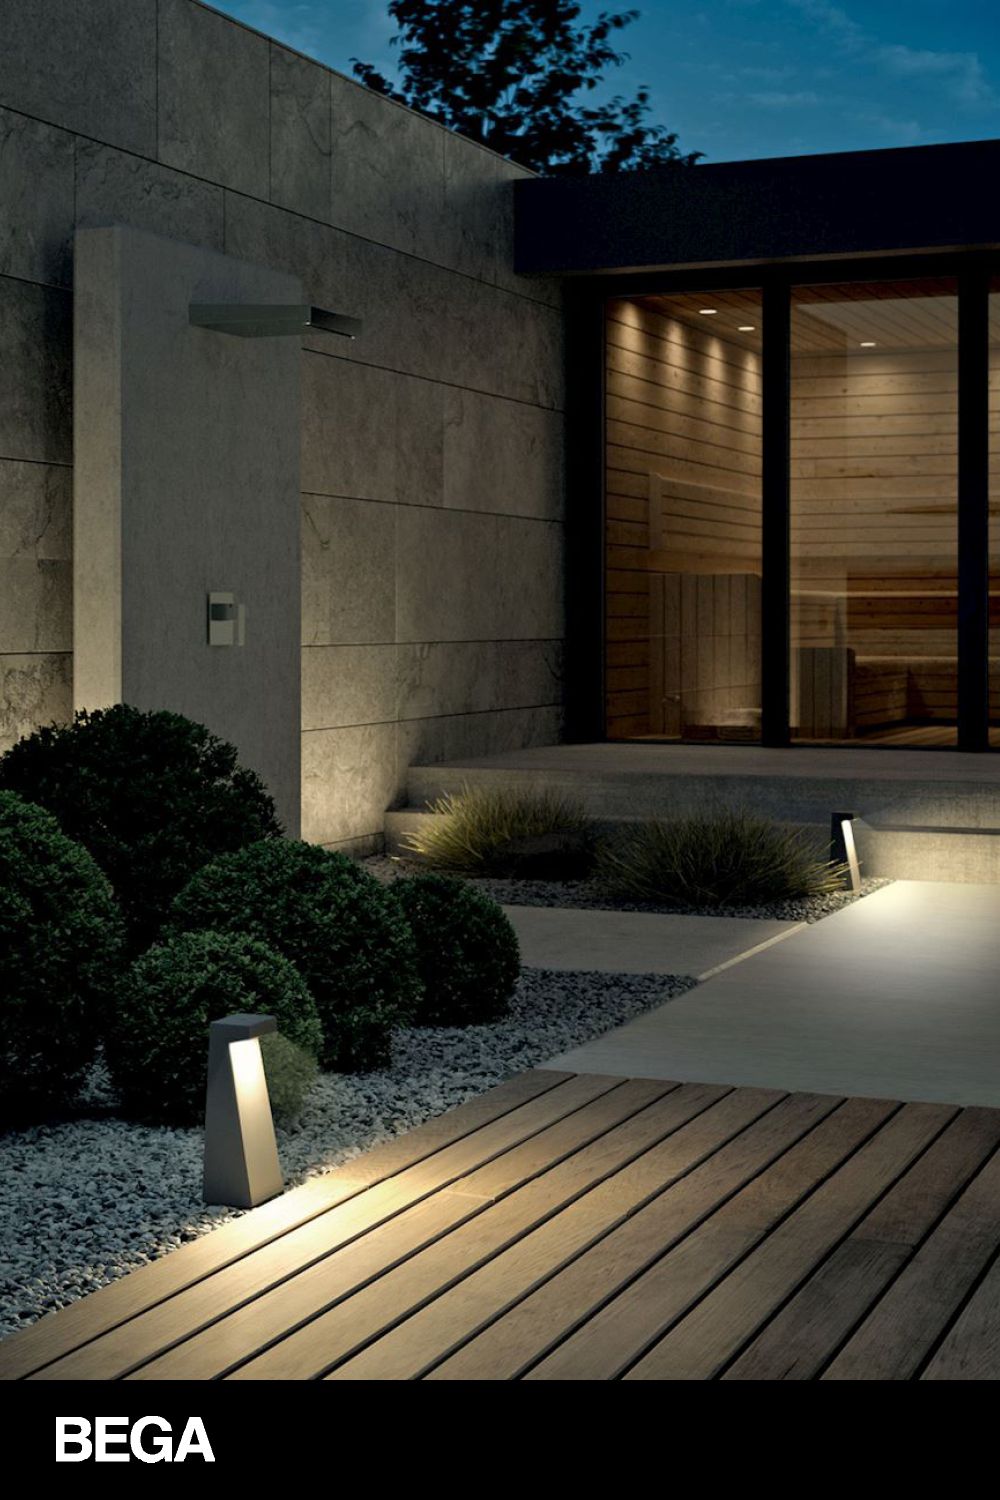 Outdoor Lighting Design Enhance Your Outdoor Space with Stylish and Functional Lighting Ideas